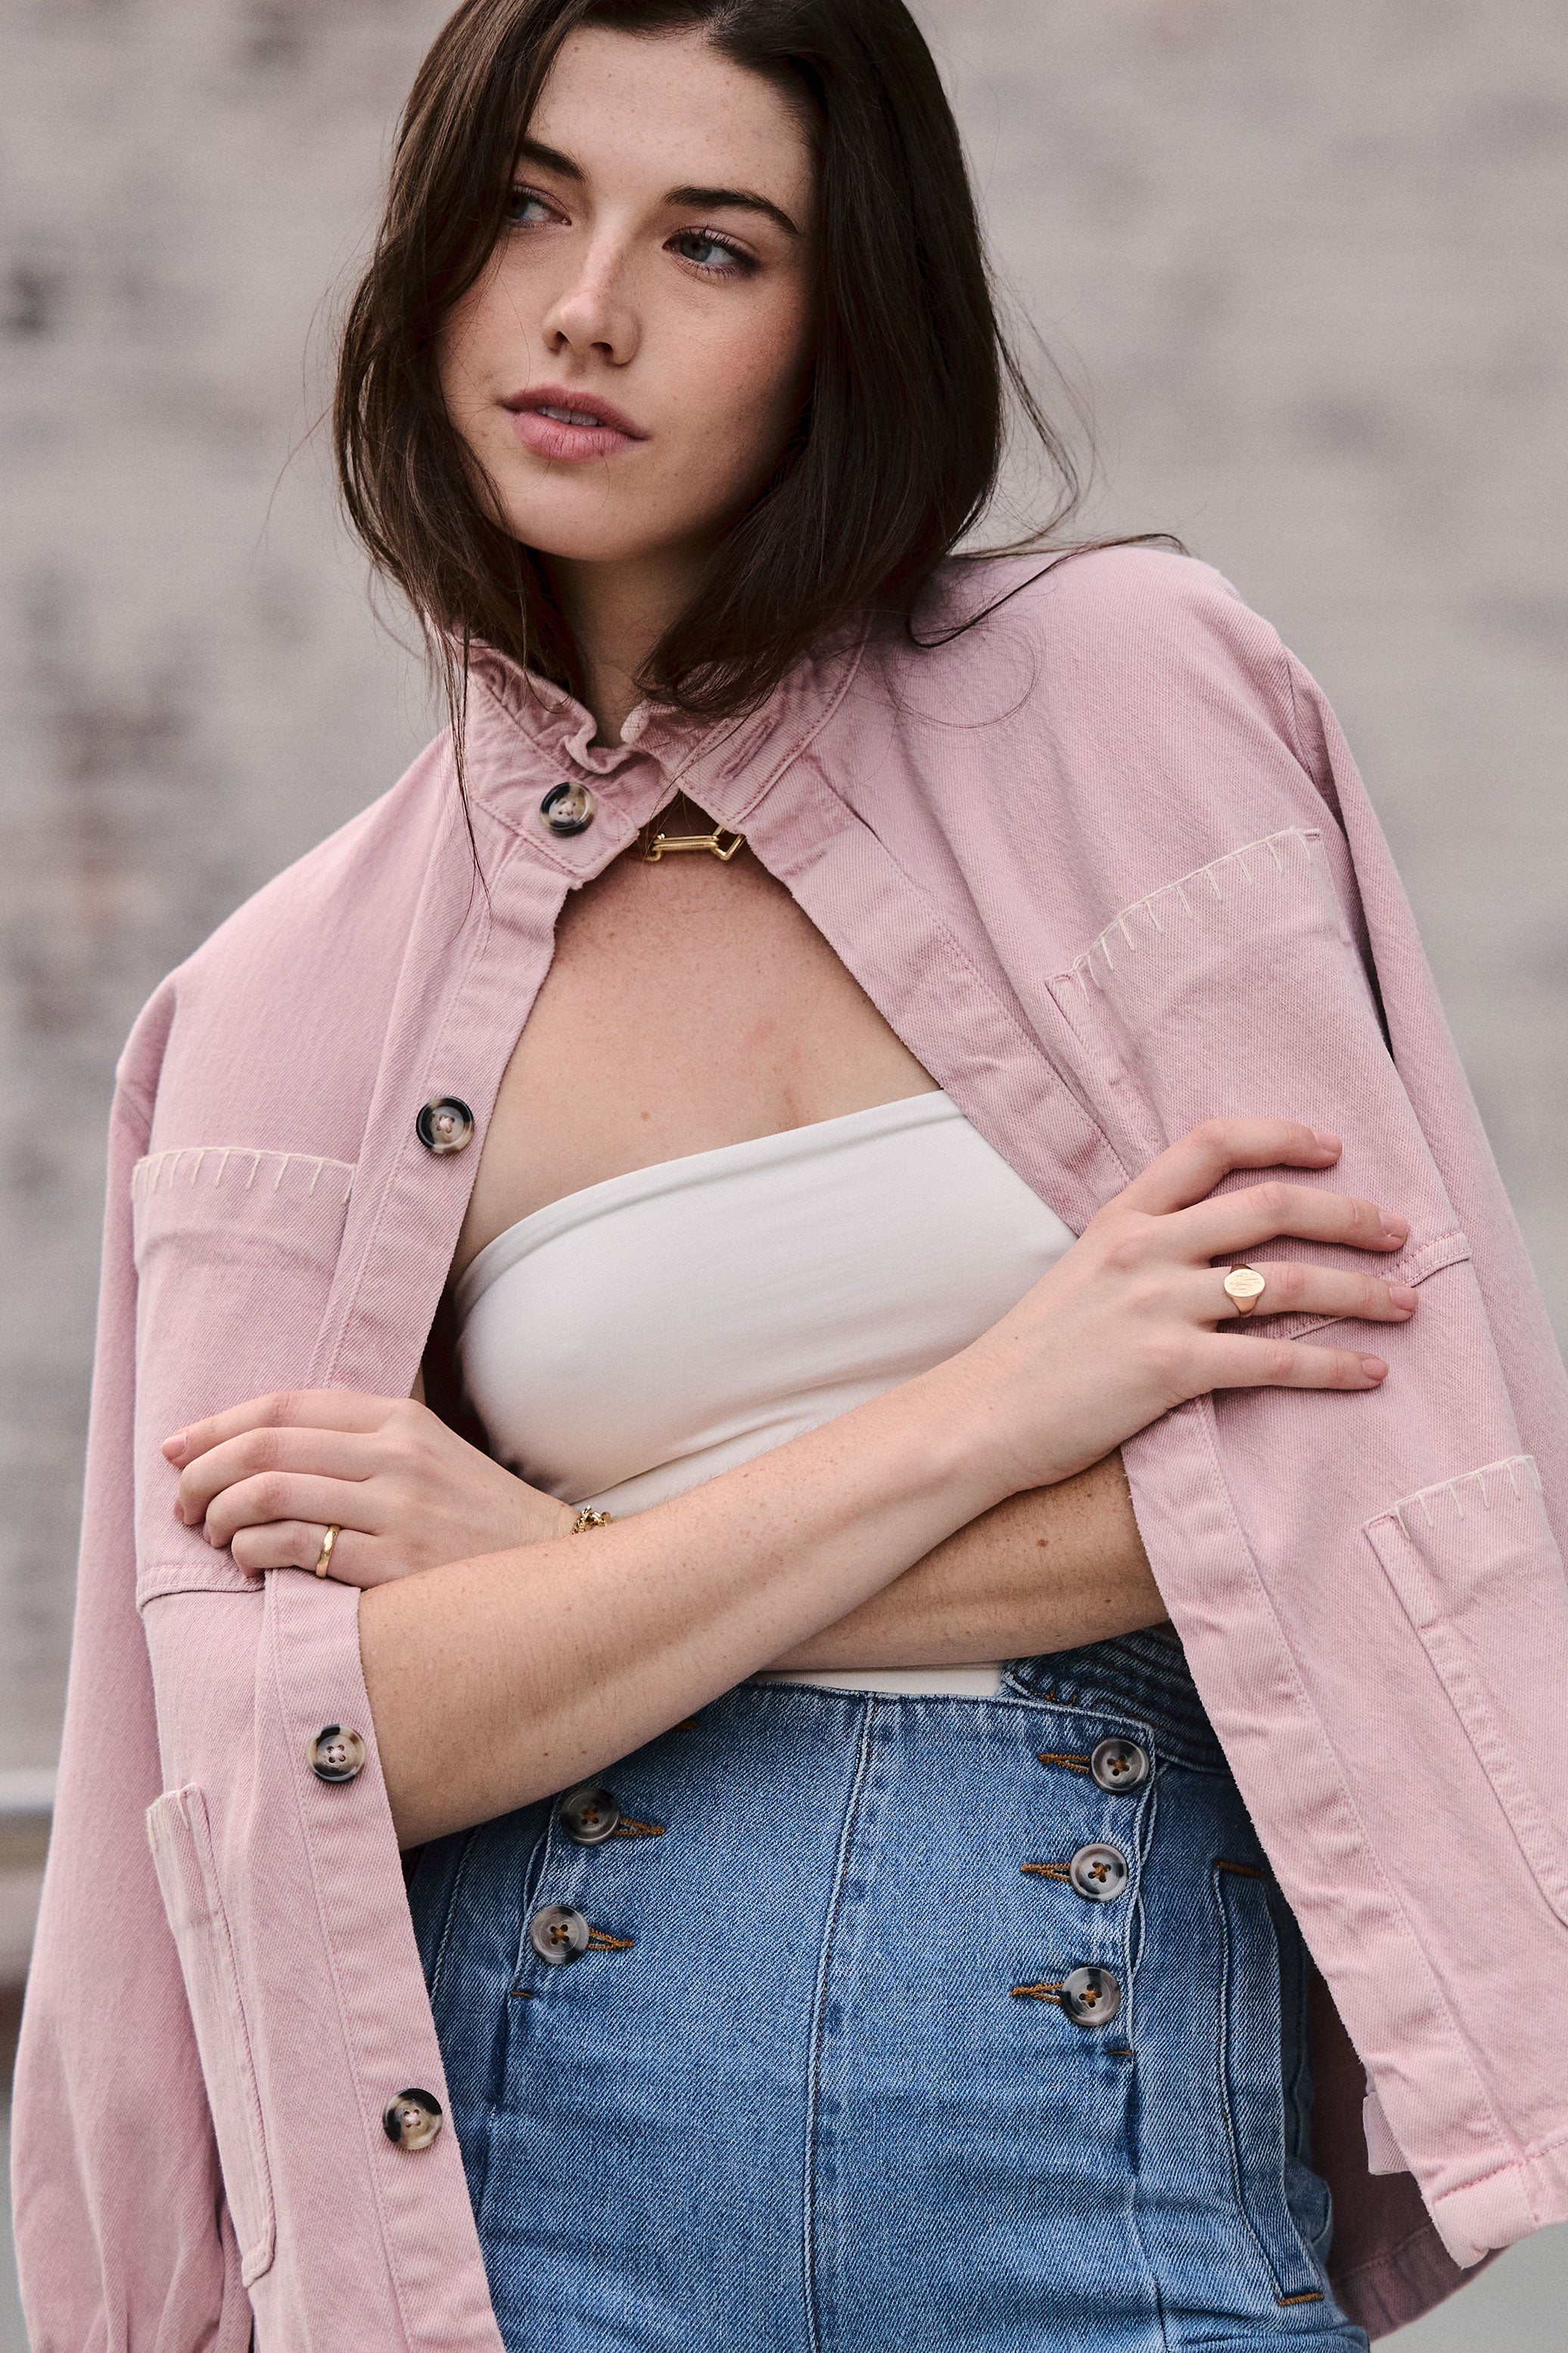 RTÉ Today - Outfit 3. JESS Fridays Edit JACKET €80.00 Fridays Edit Pink  Denim Jacket https://fridaysedit.com/collections/coats-and-jackets/products/ pink-denim-jacket TOP €35.99 Fridays Edit White Cropped Shirt  https://fridaysedit.com/collections/new ...